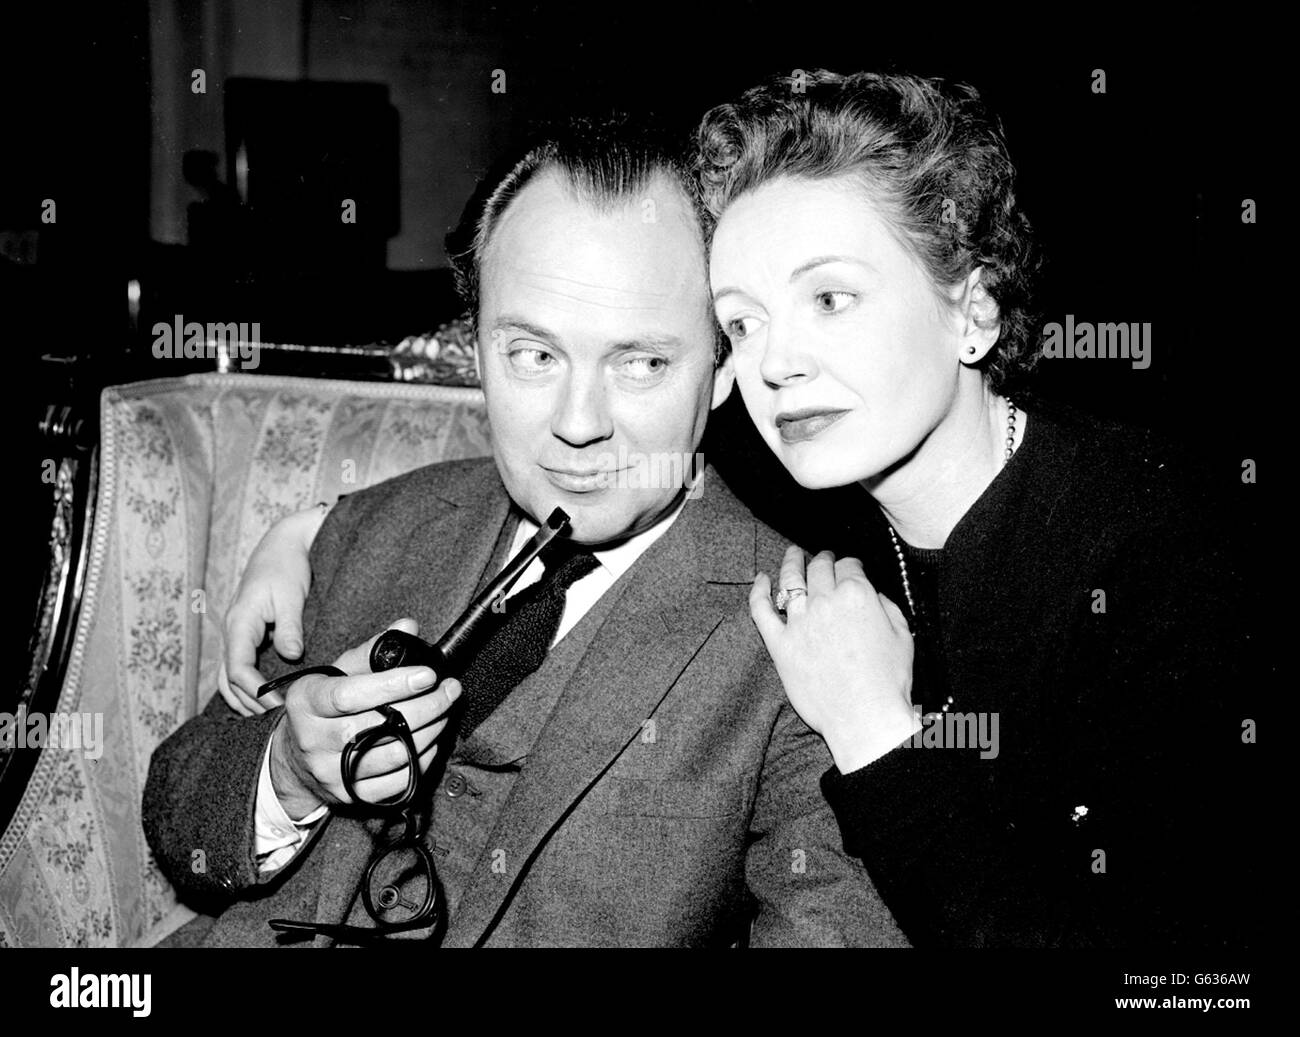 For the first time since Christmas 1951 when she appeared in 'The Holly and the Ivy', actress Phyllis calvert is to be seen in a full-length BBC television play. She is pictured rehearsing with co-star Derek Farr at the Television Centre, London for the production of Roger MacDougall's comedy 'Escapade'. Stock Photo